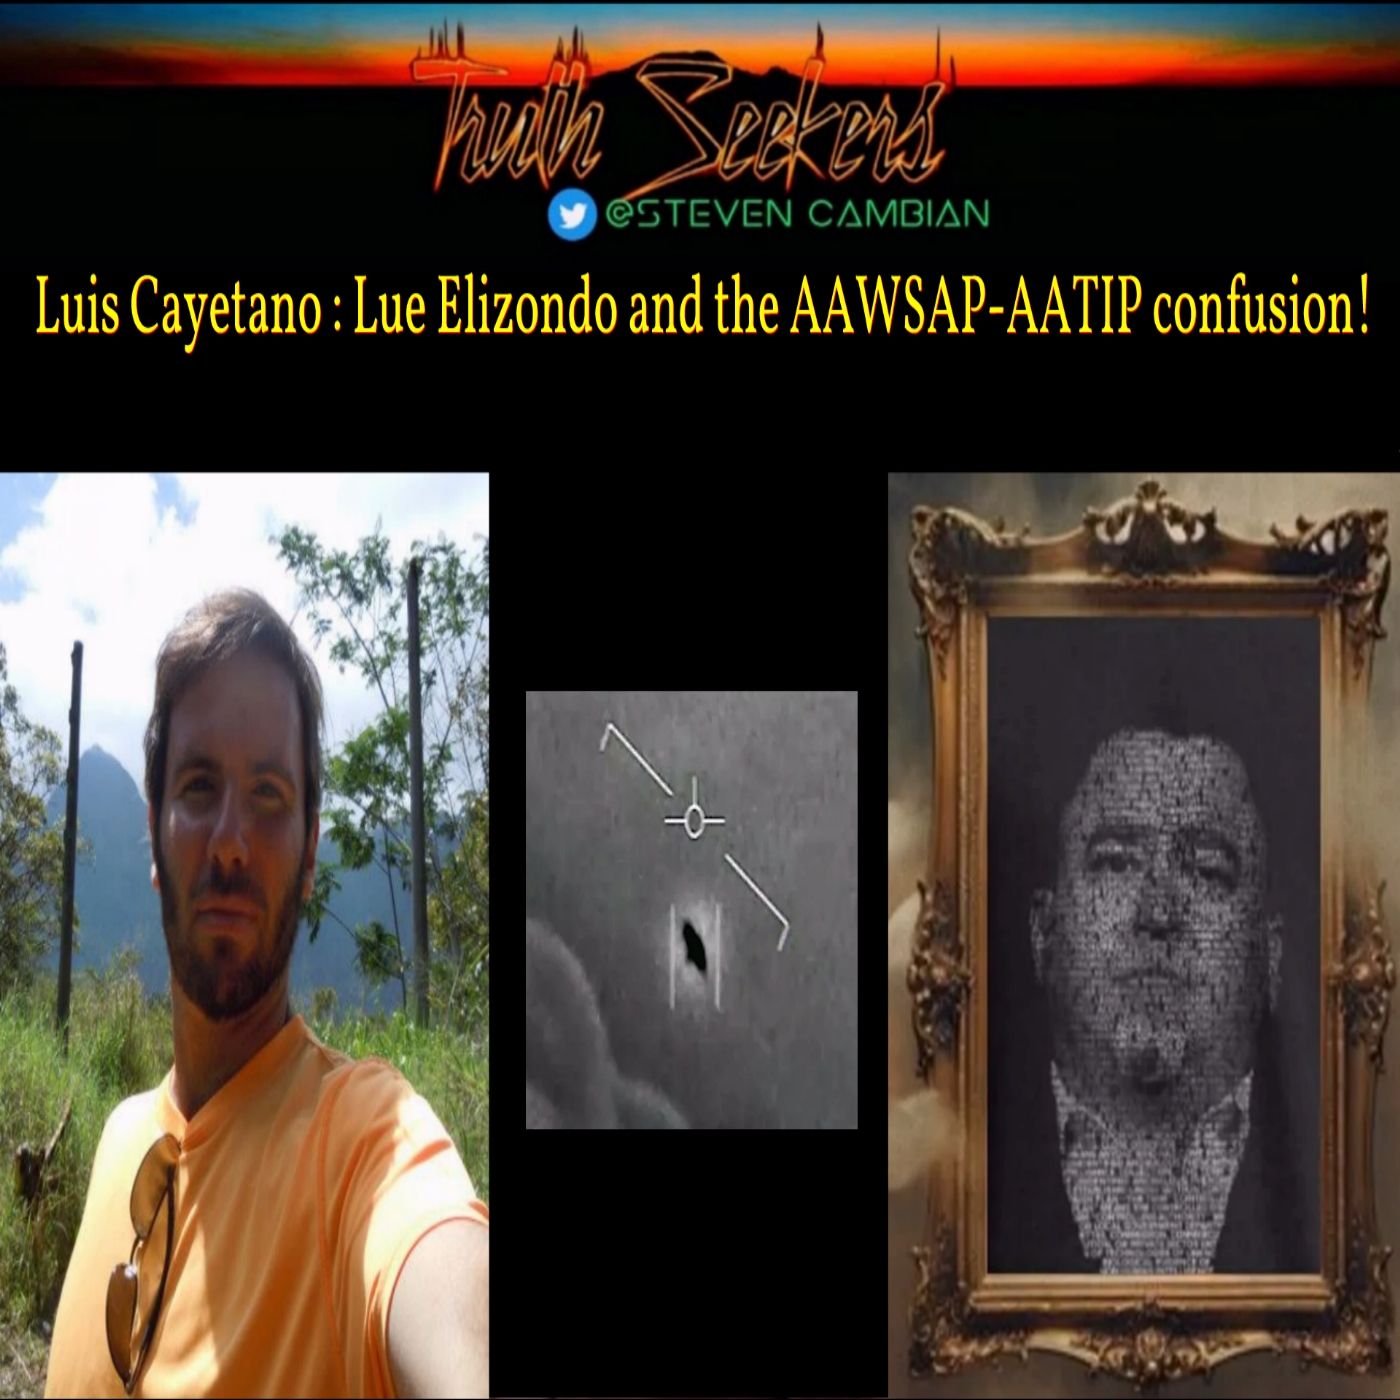 Luis Cayetano : Lue Elizondo and the AAWSAP-AATIP confusion!